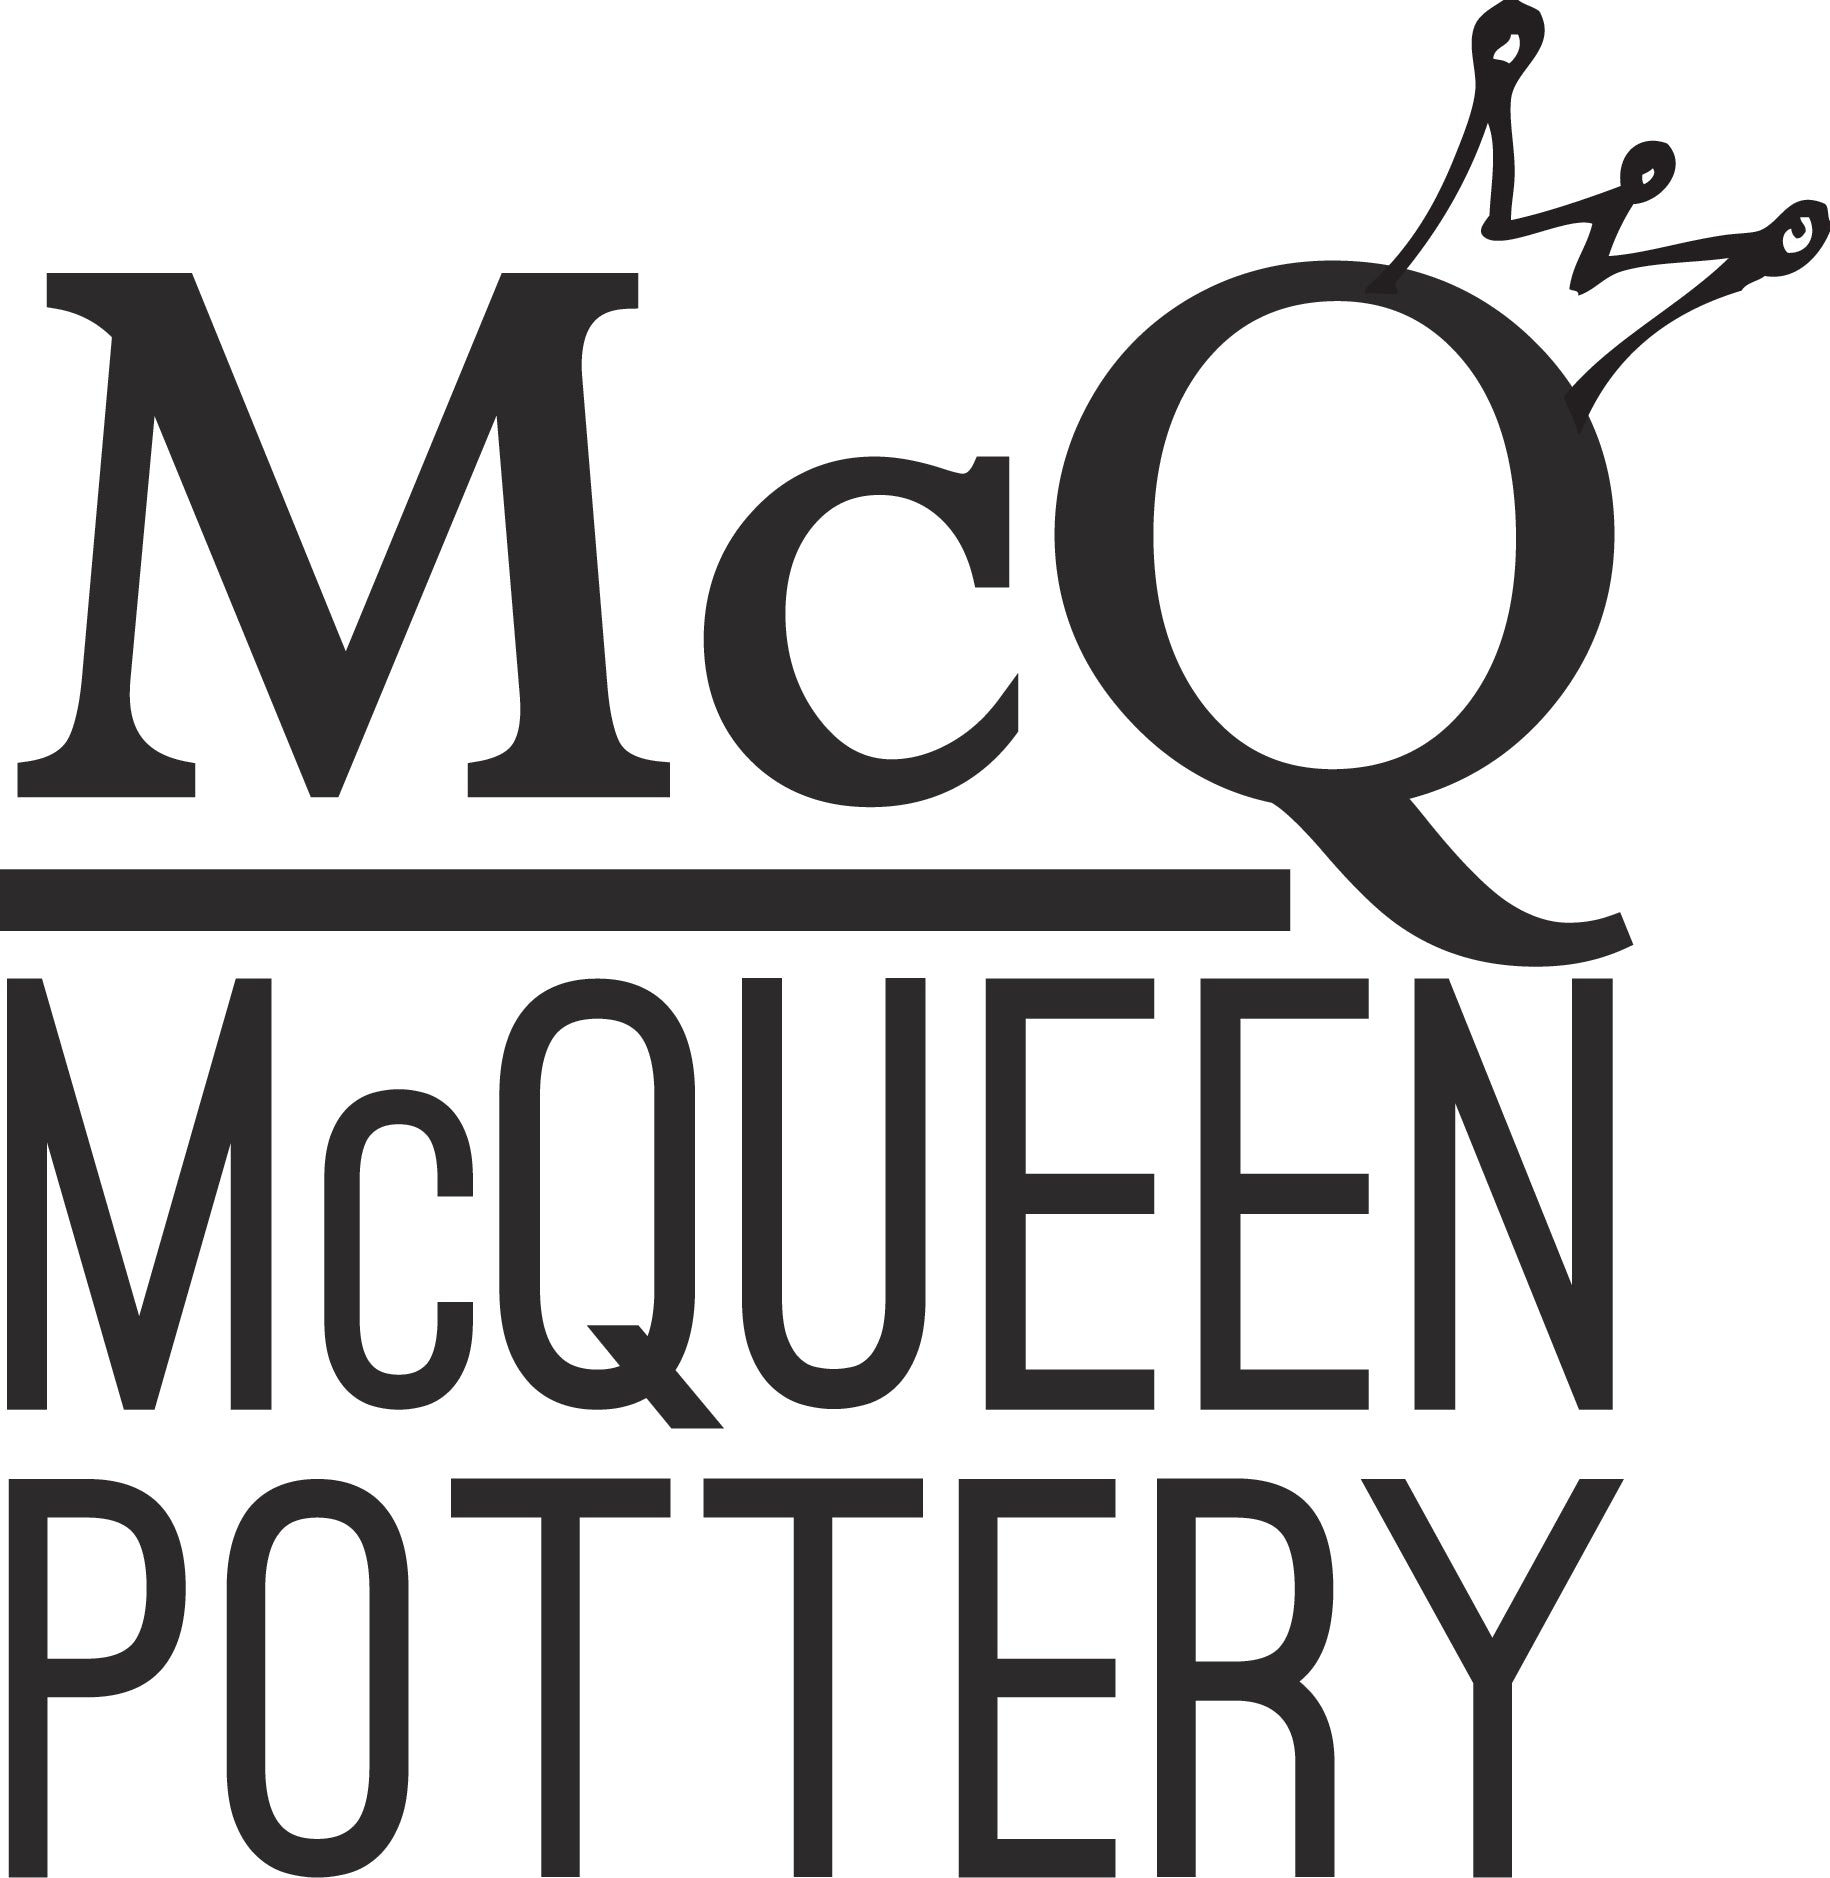 McQueen Pottery Gift Card